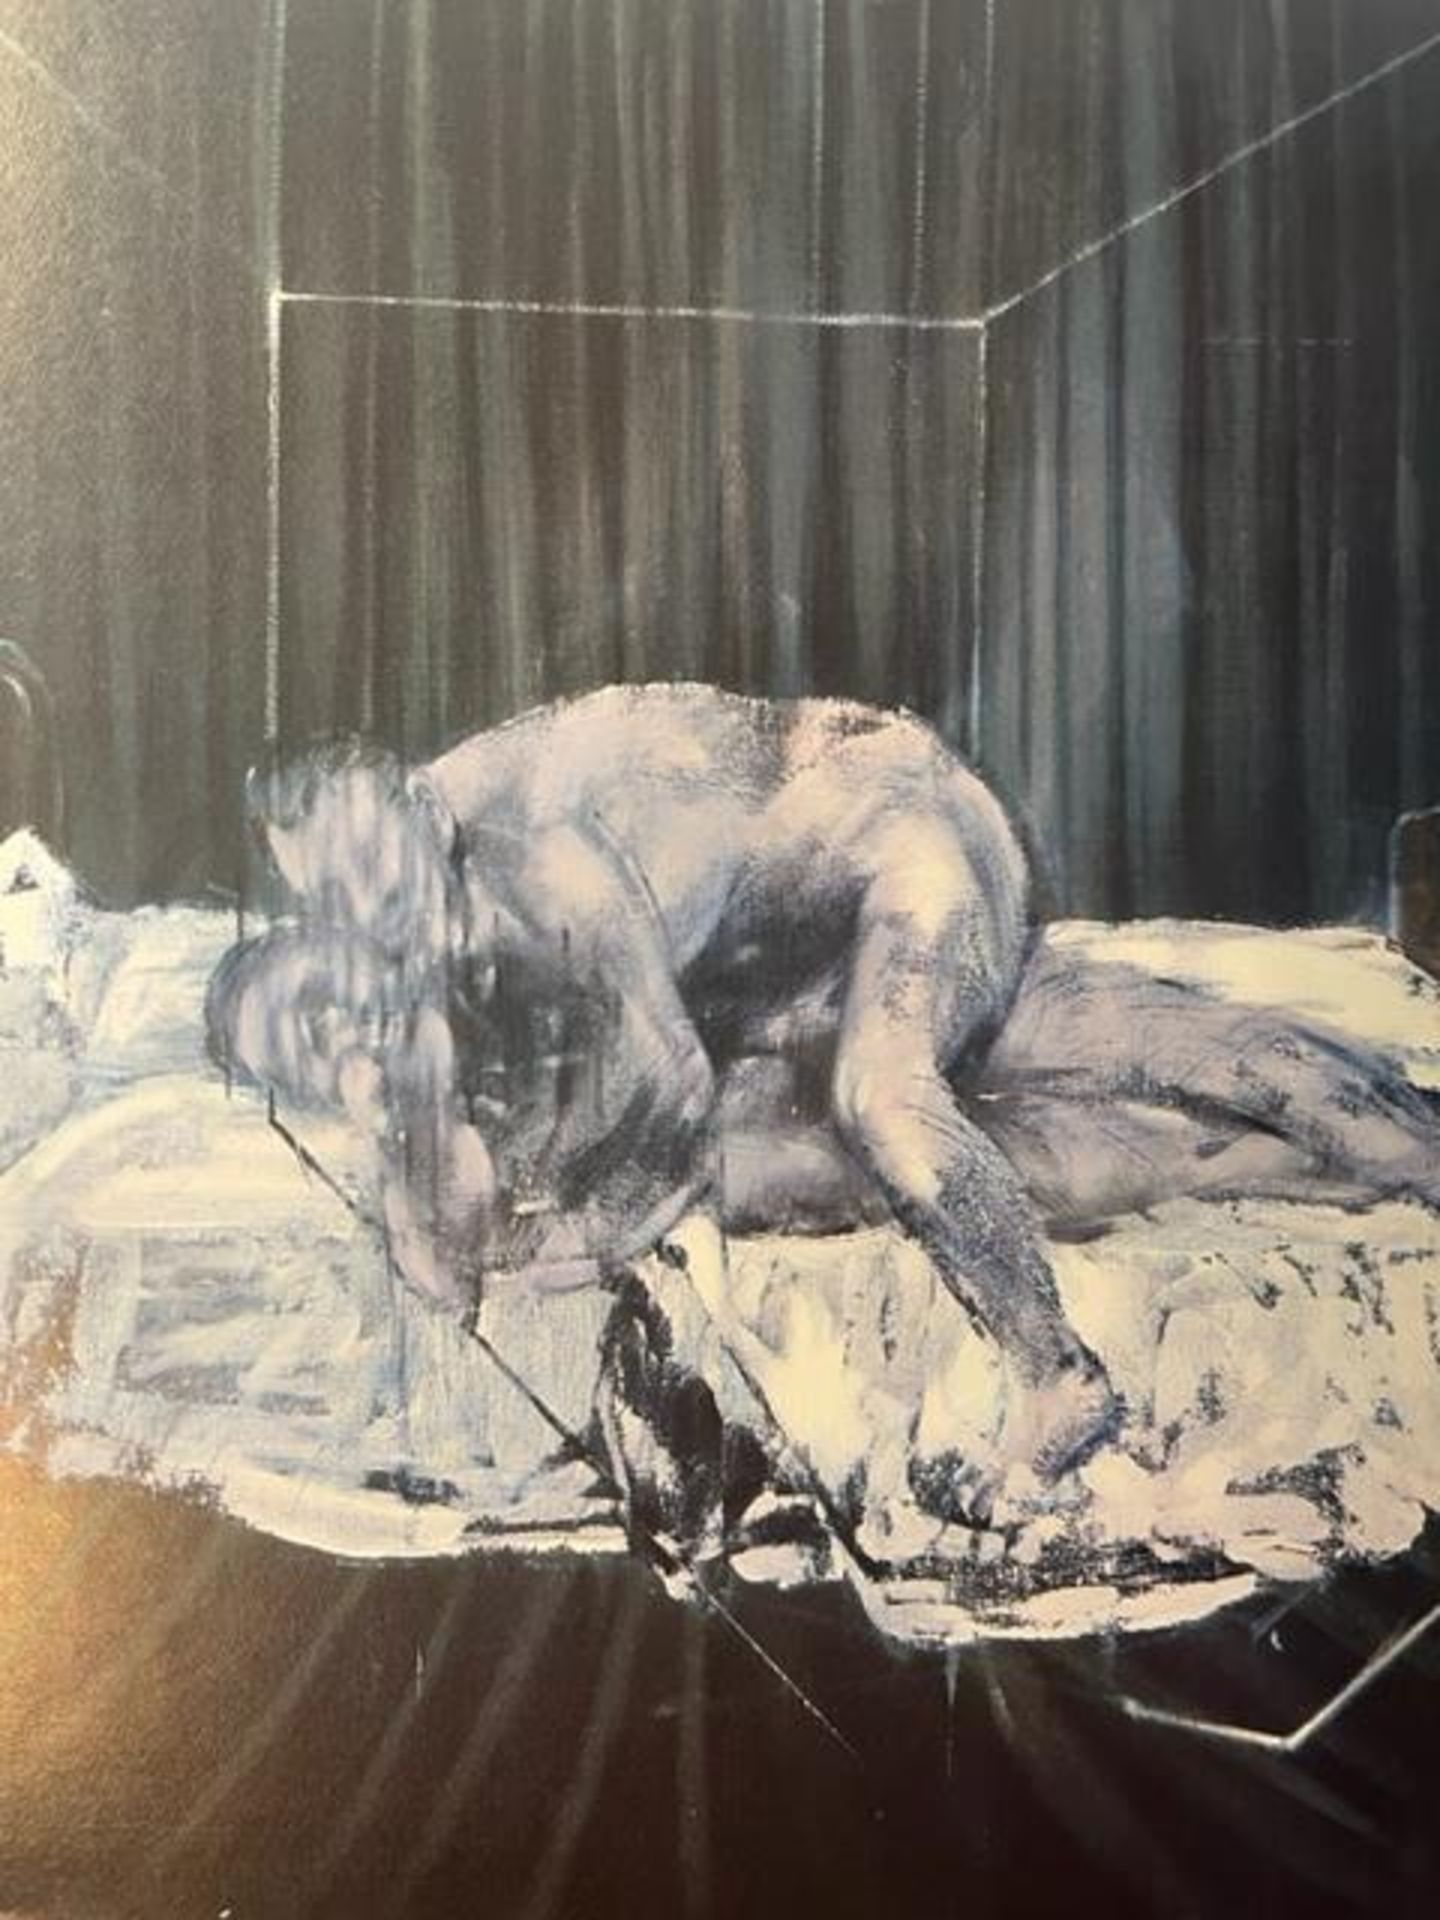 Francis Bacon "Two Figures" Print.